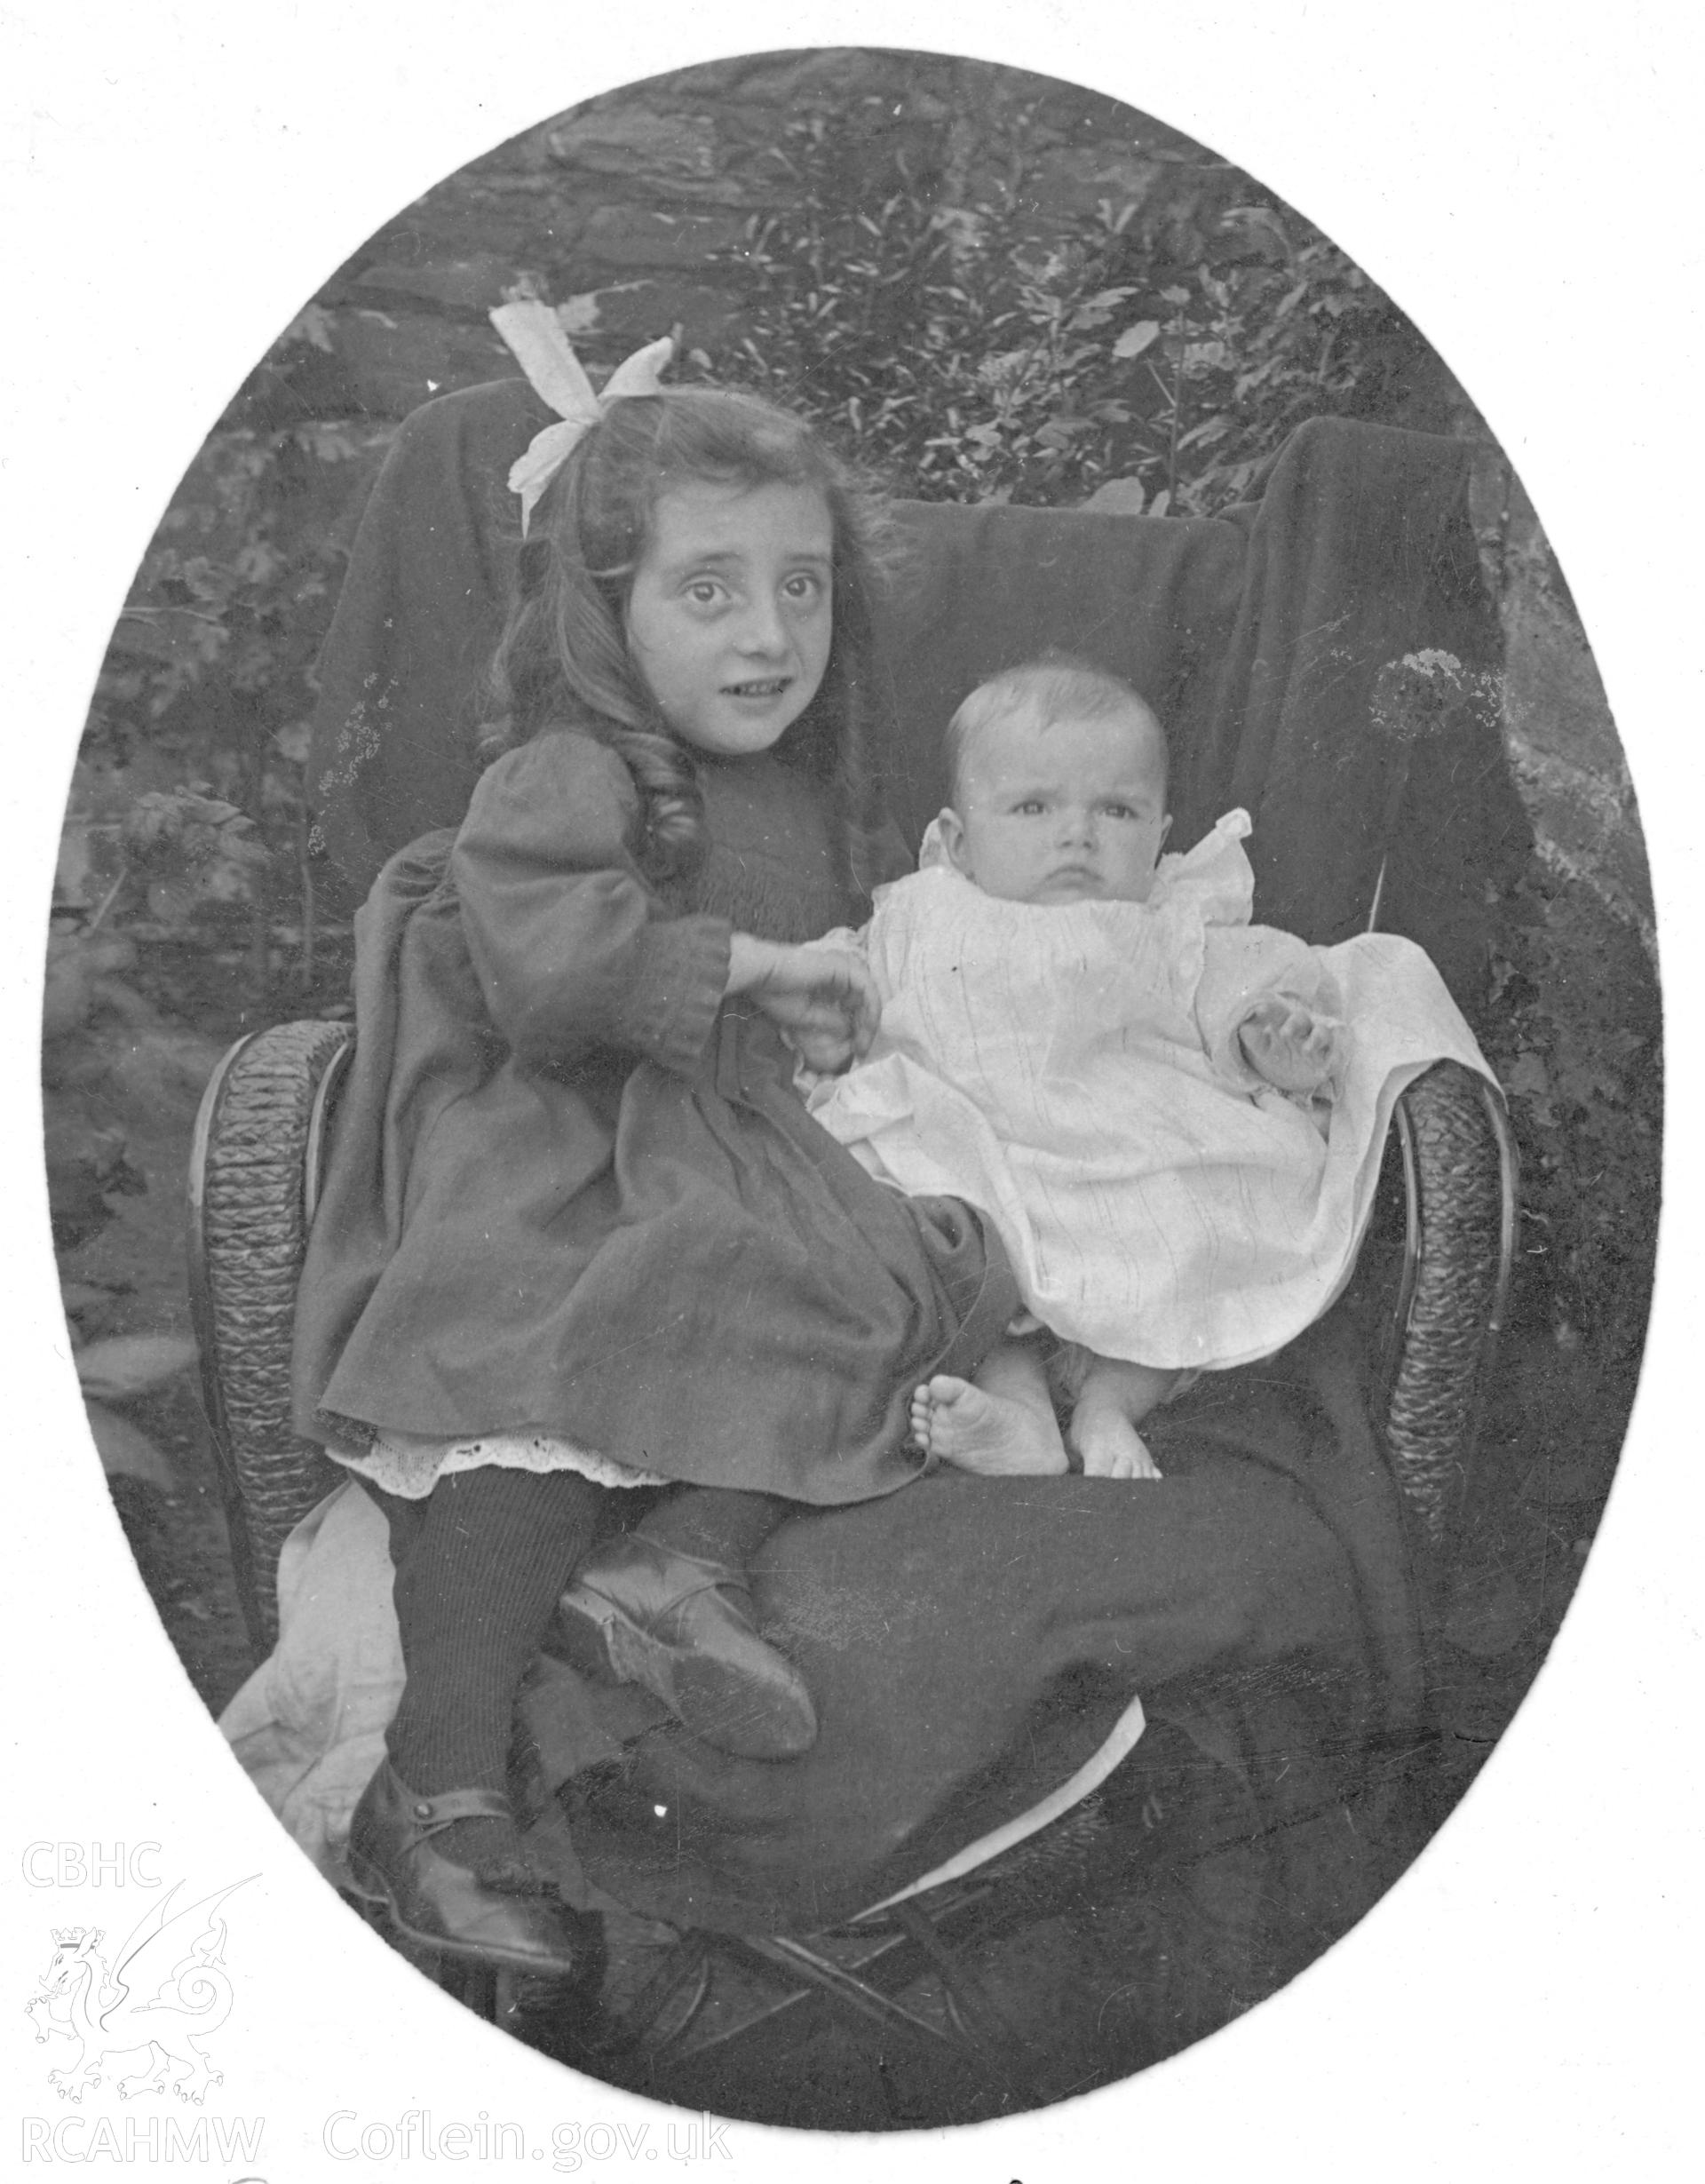 "At Llanelly 1905". Photo of a seated child and baby. Digitised from a photograph album showing views of Aberystwyth and District, produced by David John Saer, school teacher of Aberystwyth. Loaned for copying by Dr Alan Chamberlain.